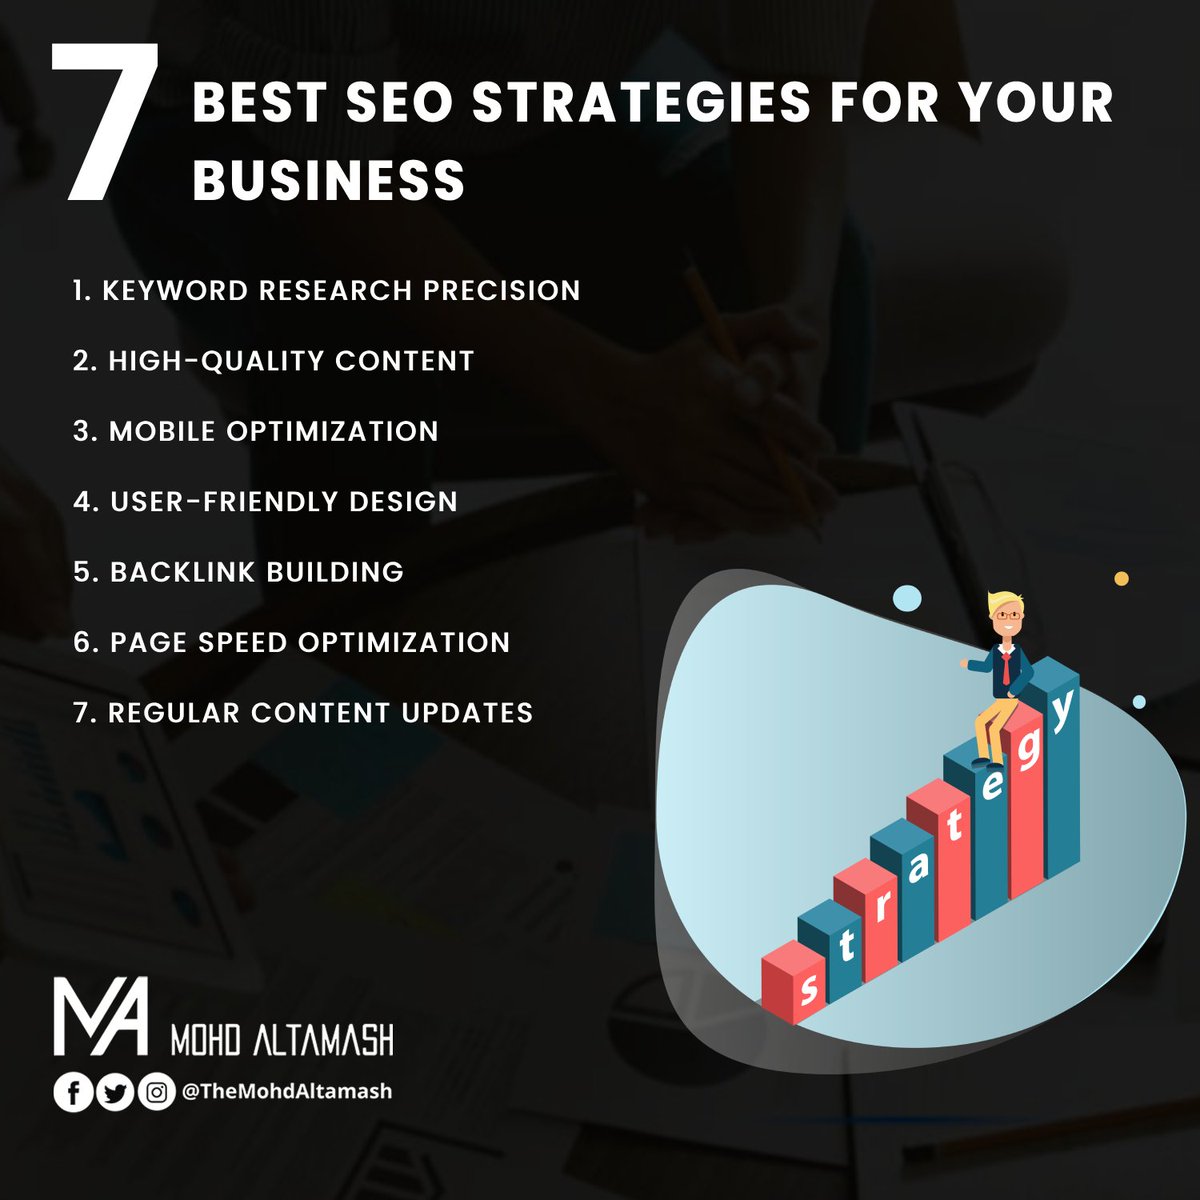 Unlock business growth with these 7 SEO strategies. Elevate your online presence.

.

.

#SEO #BusinessGrowth #KeywordResearch #ContentQuality #MobileOptimization #UserFriendlyDesign #BacklinkBuilding #PageSpeed #ContentUpdates #OnlinePresence